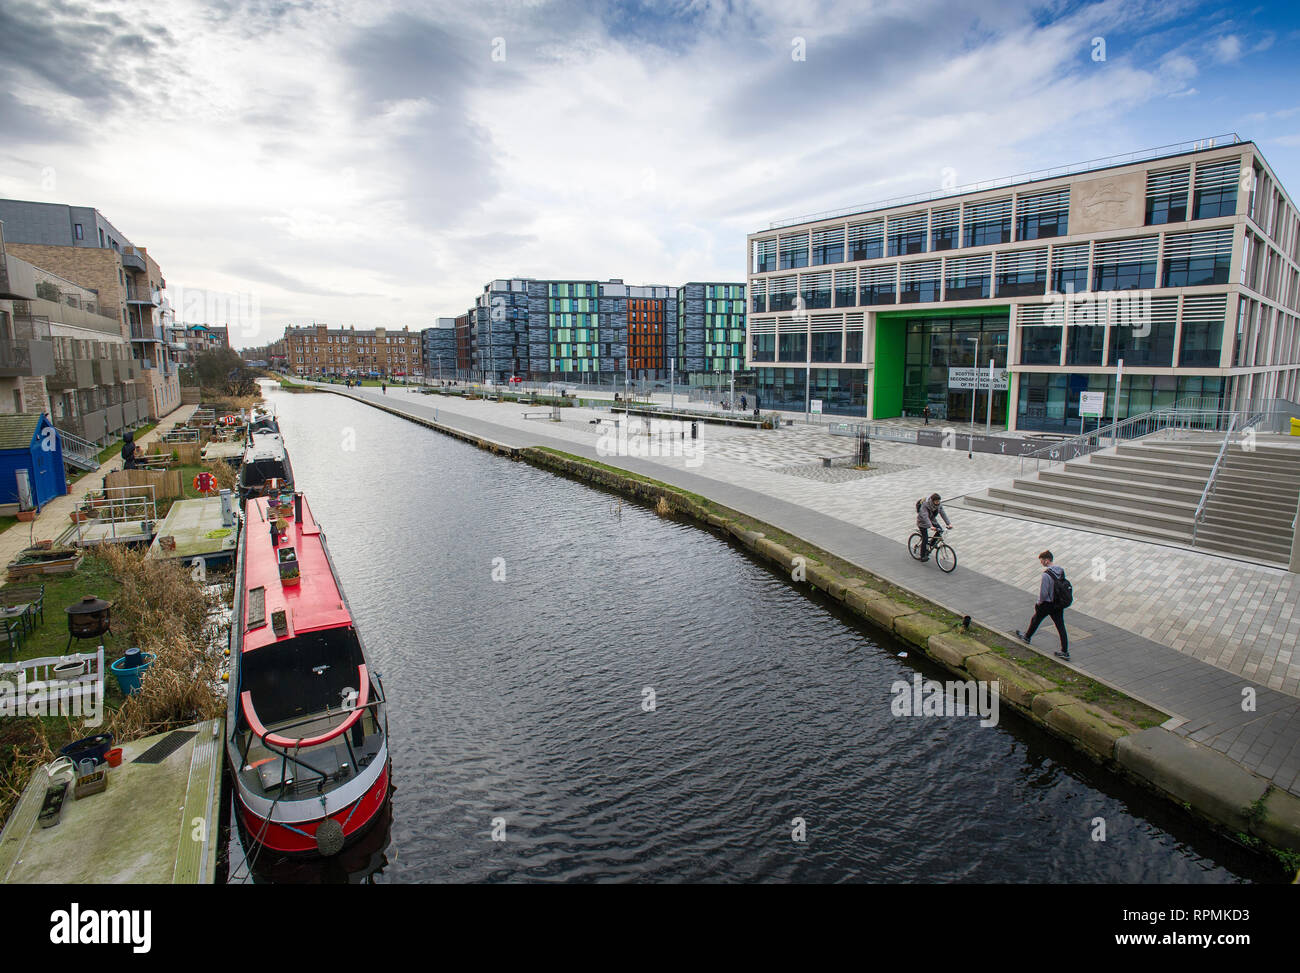 The new Boroughmuir High School overlooking the Union canal in Edinburgh. Stock Photo